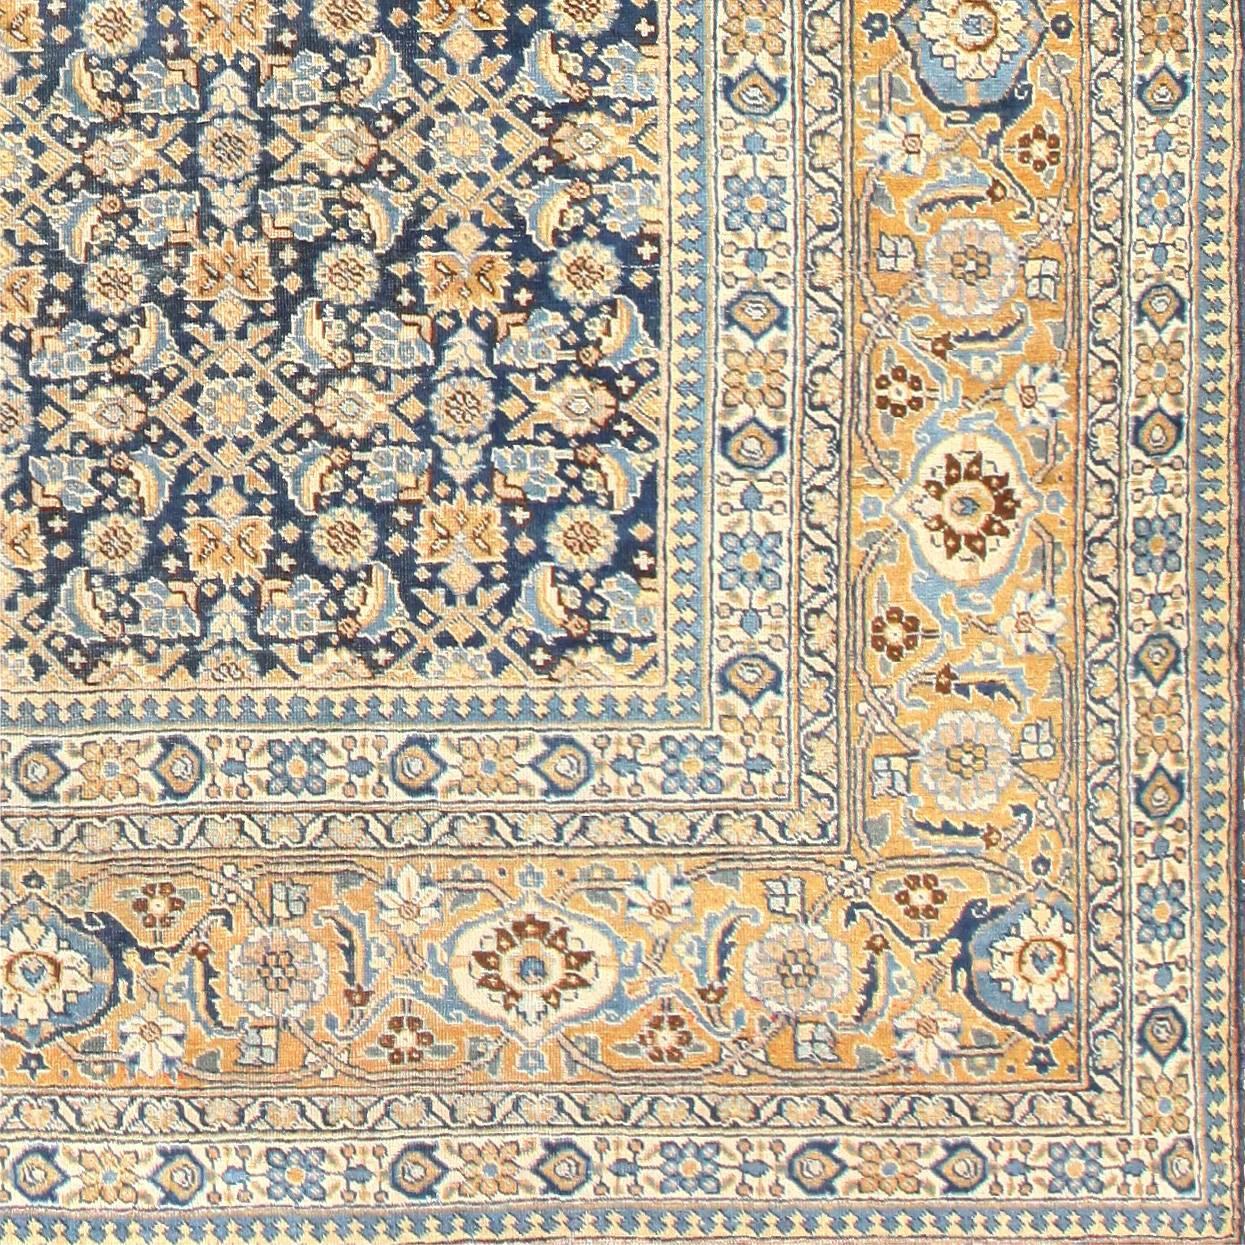 Hand-Knotted Room Size Antique Persian Tabriz Rug. Size: 11 ft x 14 ft 6 in (3.35 m x 4.42 m)